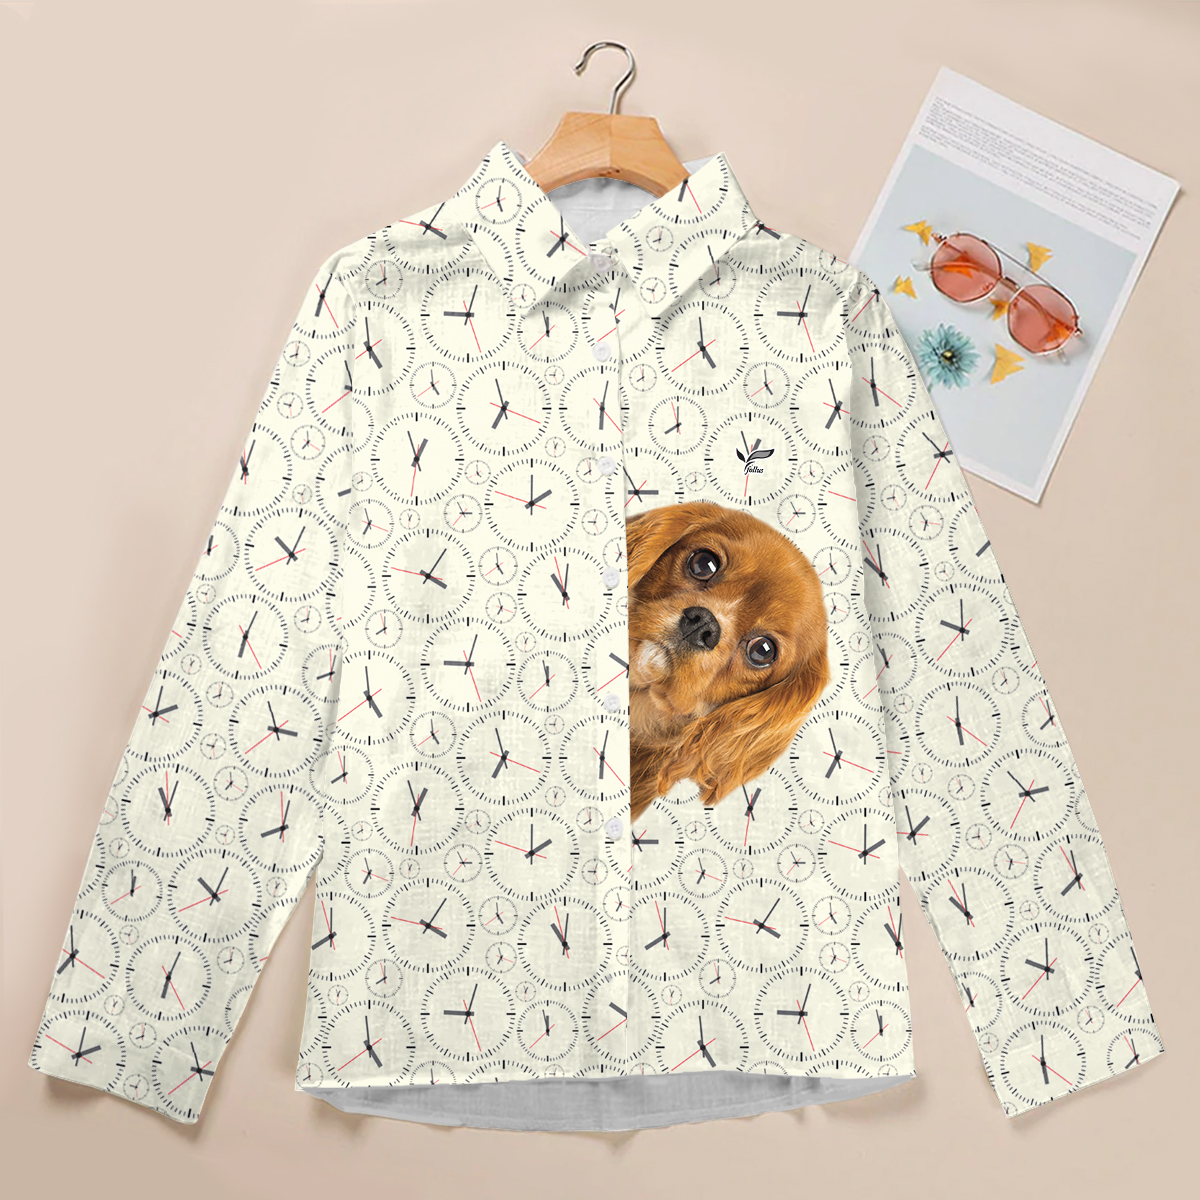 It's Paw Time For Your Cavalier King Charles Spaniel - Follus Women's Long-Sleeve Shirt V3